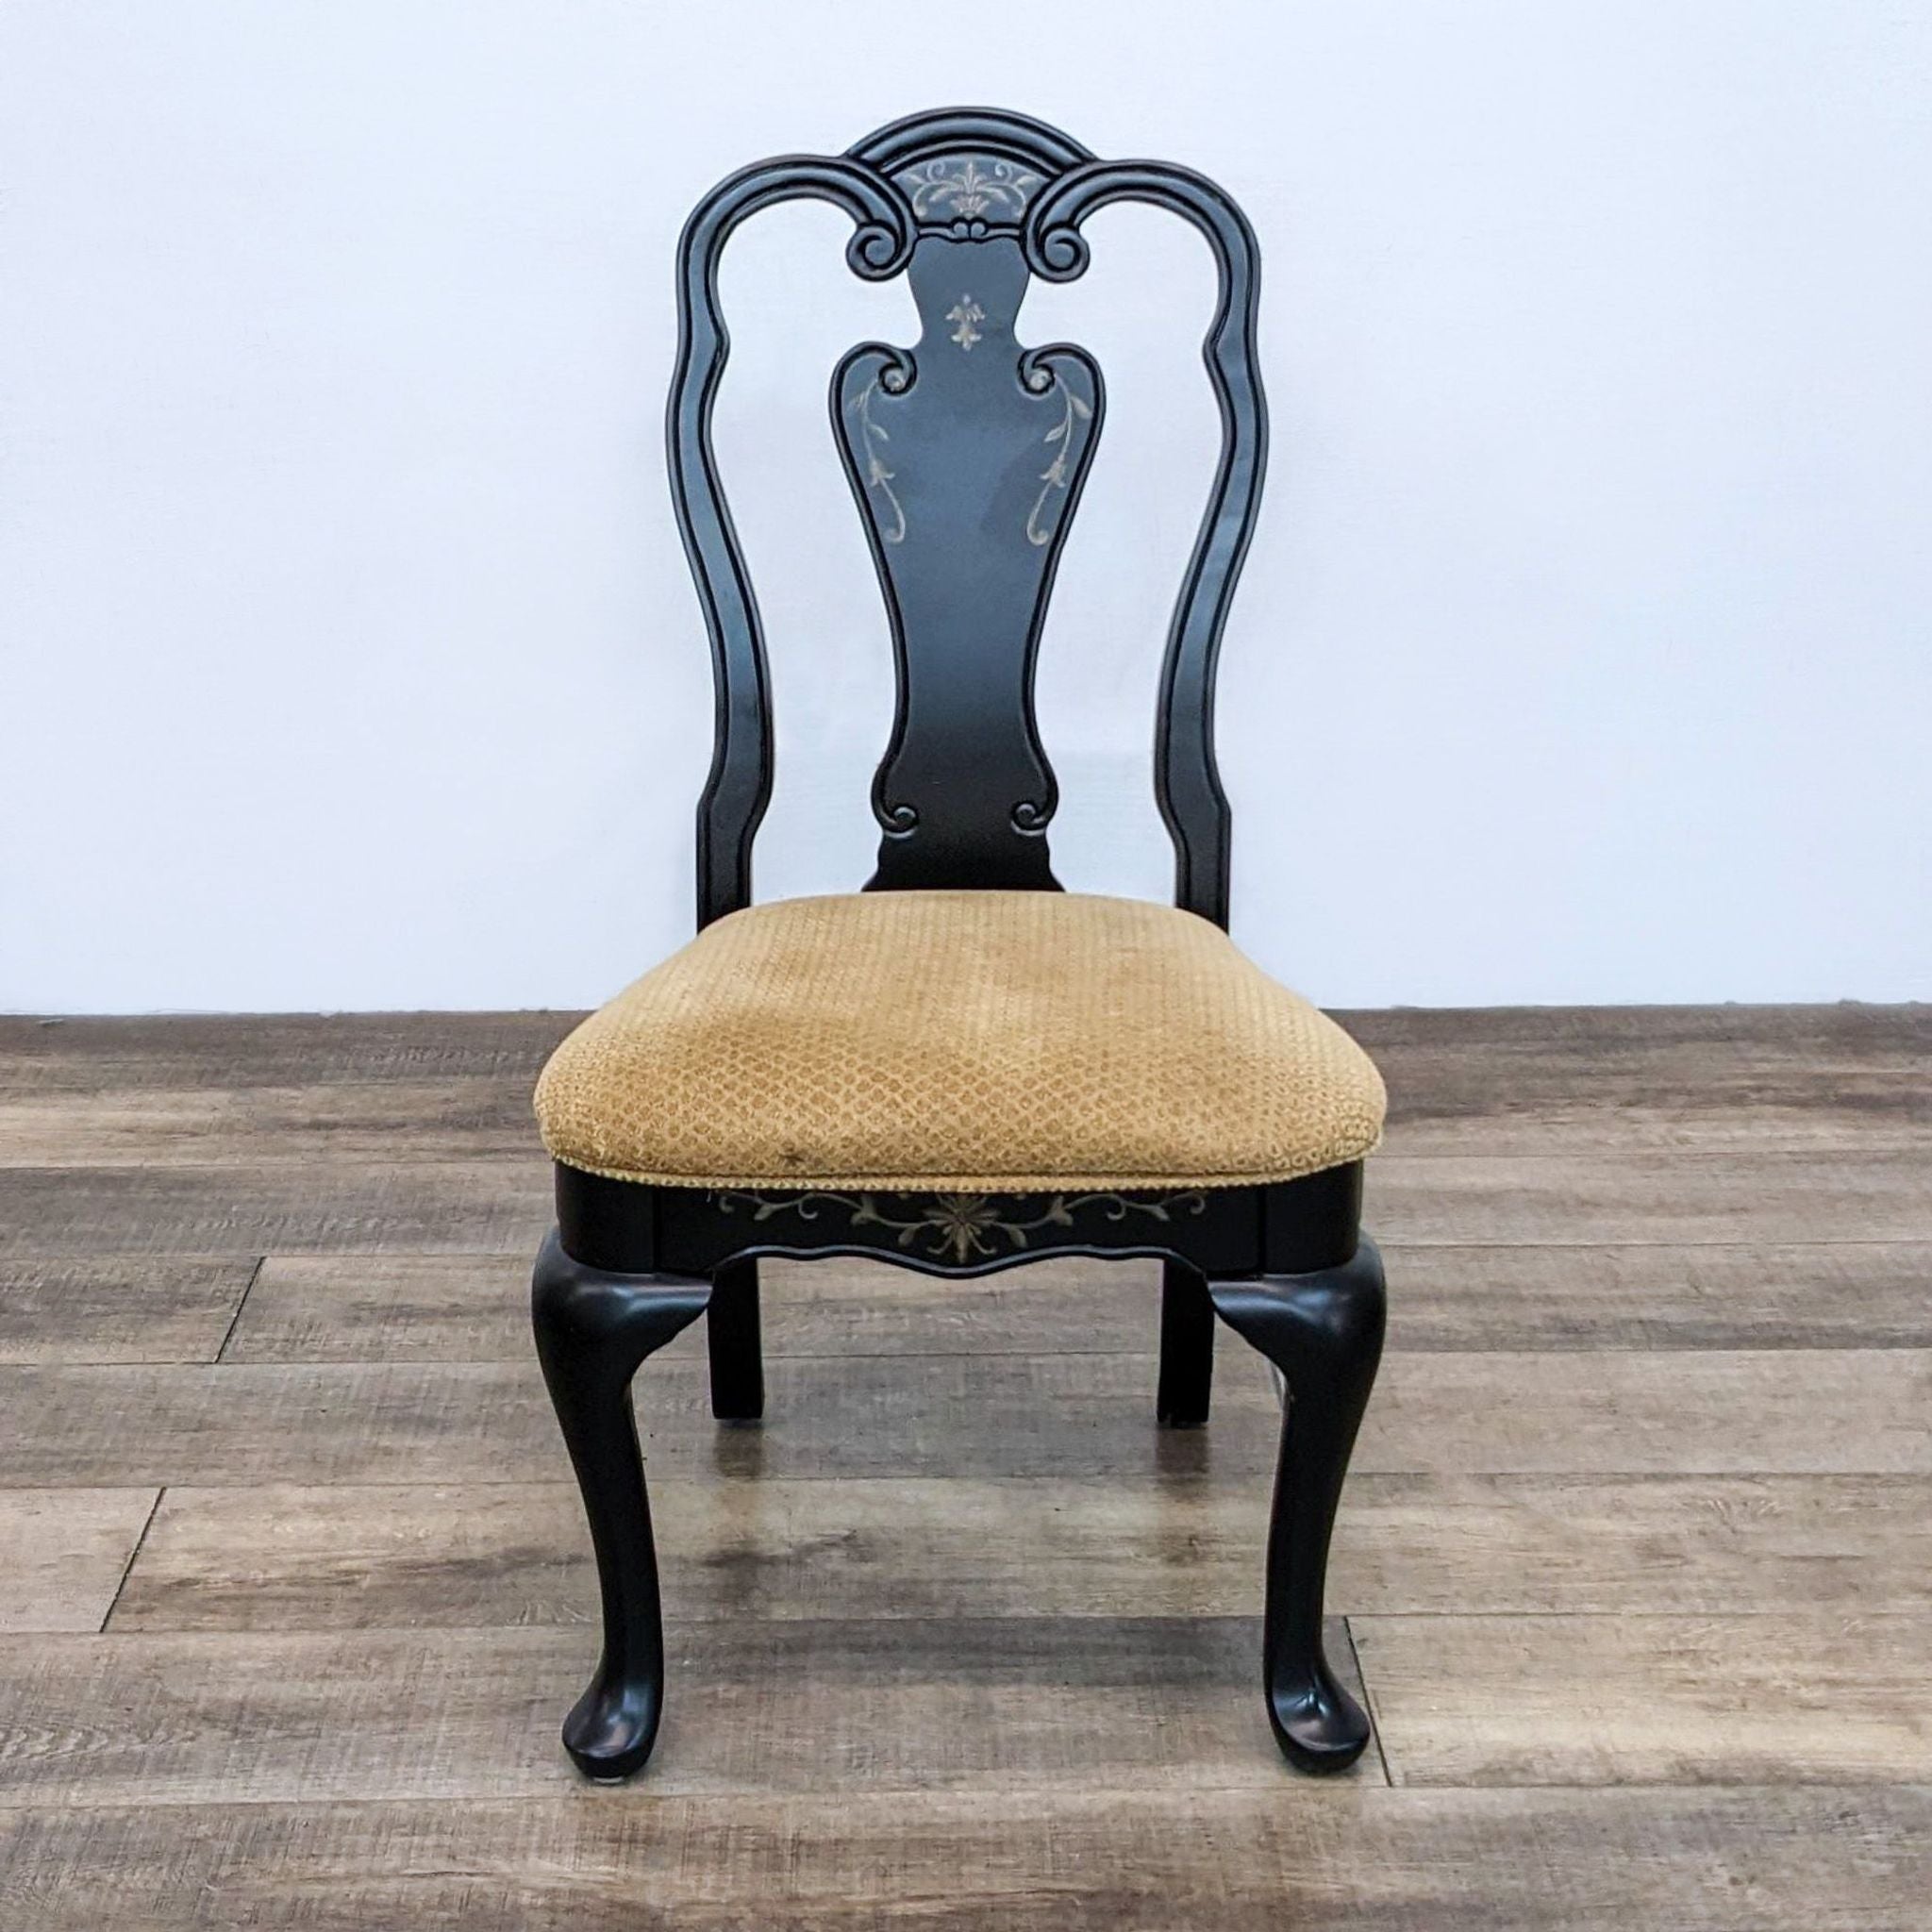 Queen Anne style black dining chair by A.R.T. Furniture Co. with floral details and upholstered seat.